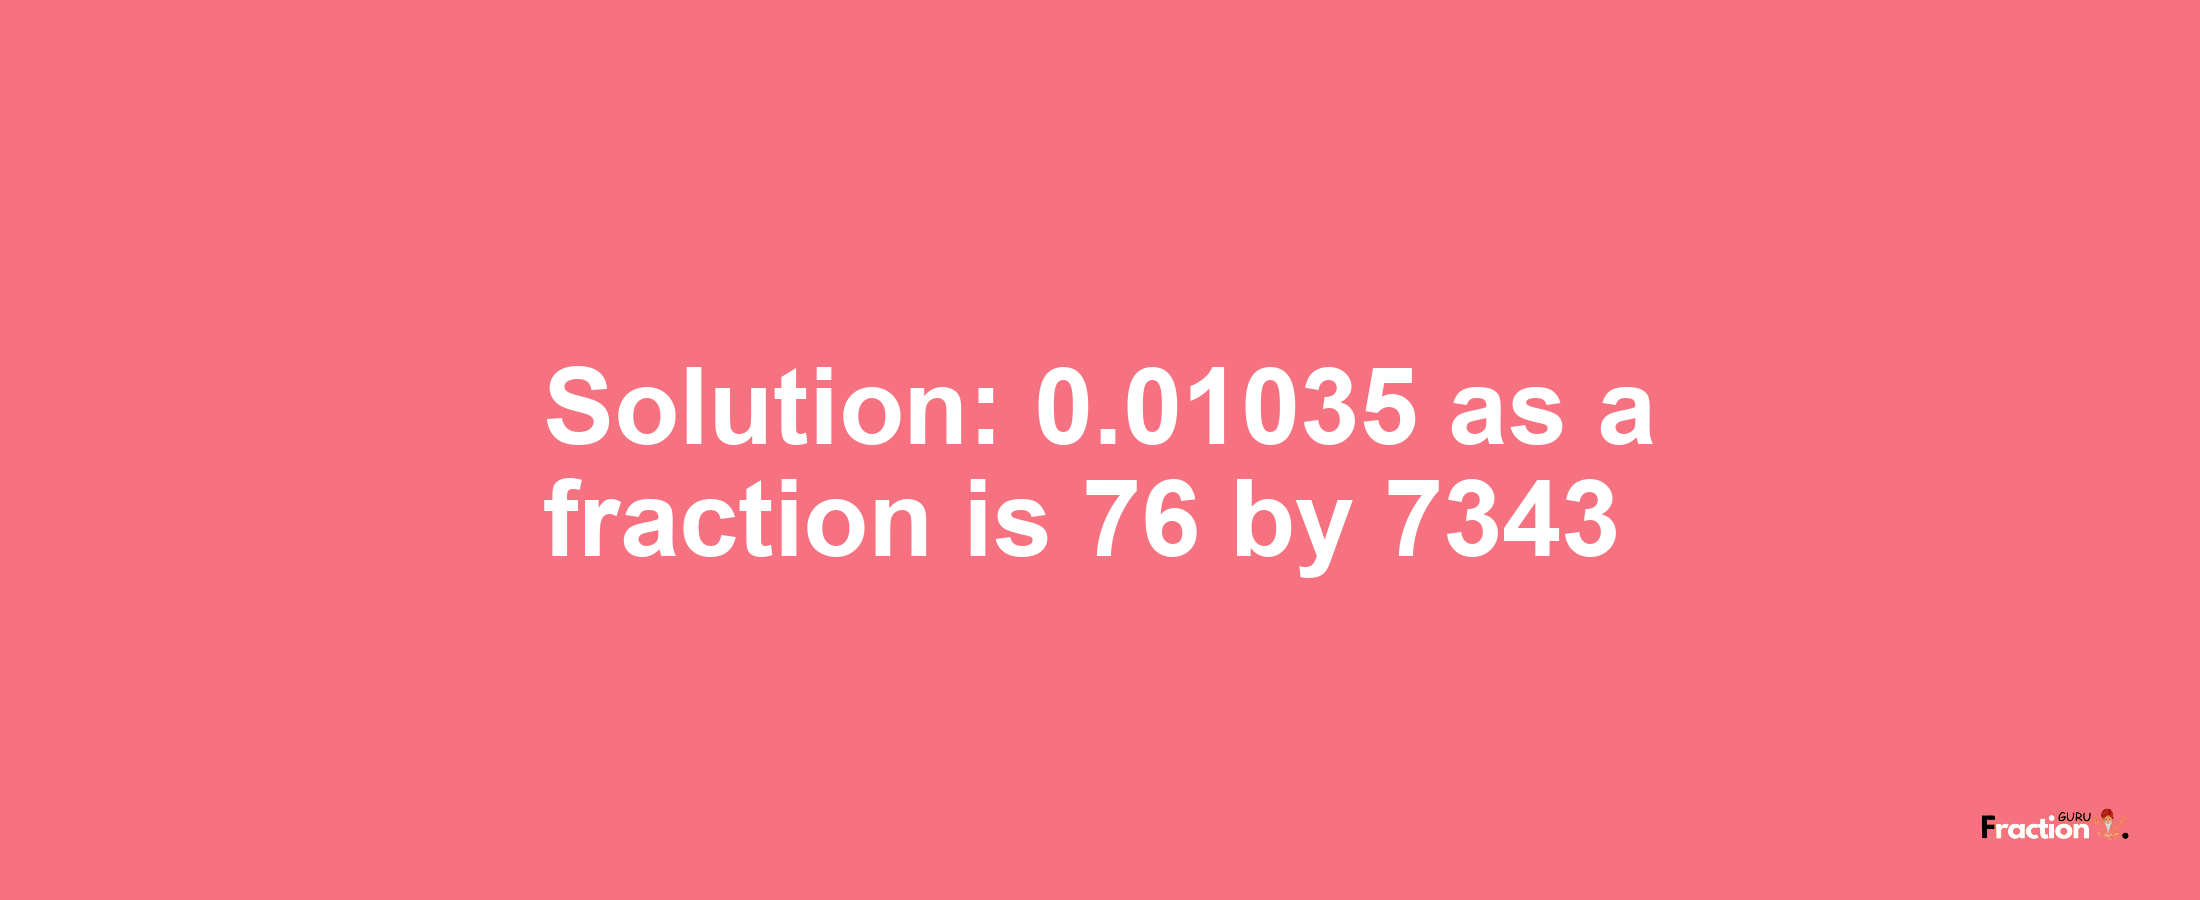 Solution:0.01035 as a fraction is 76/7343